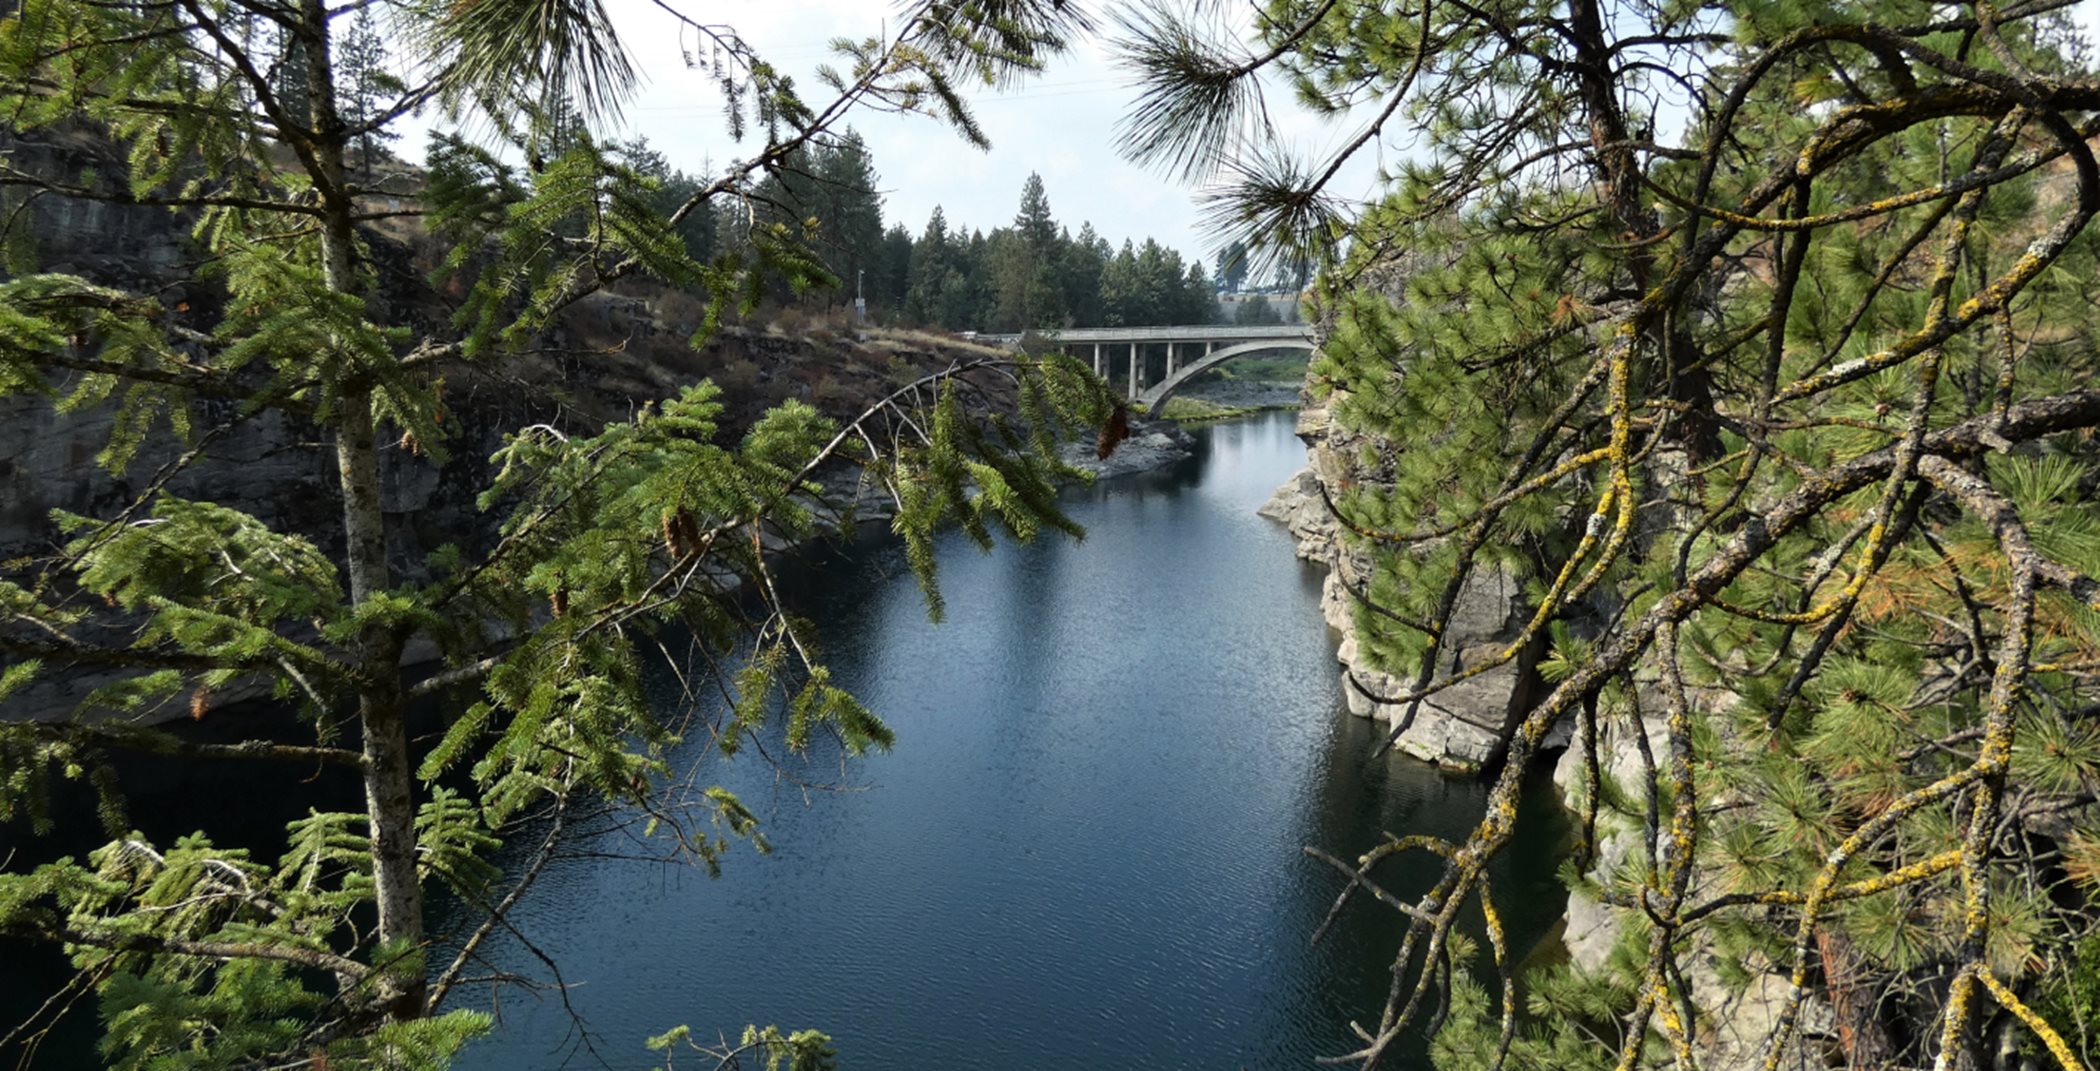 Spokane river surrounded by trees and greenery